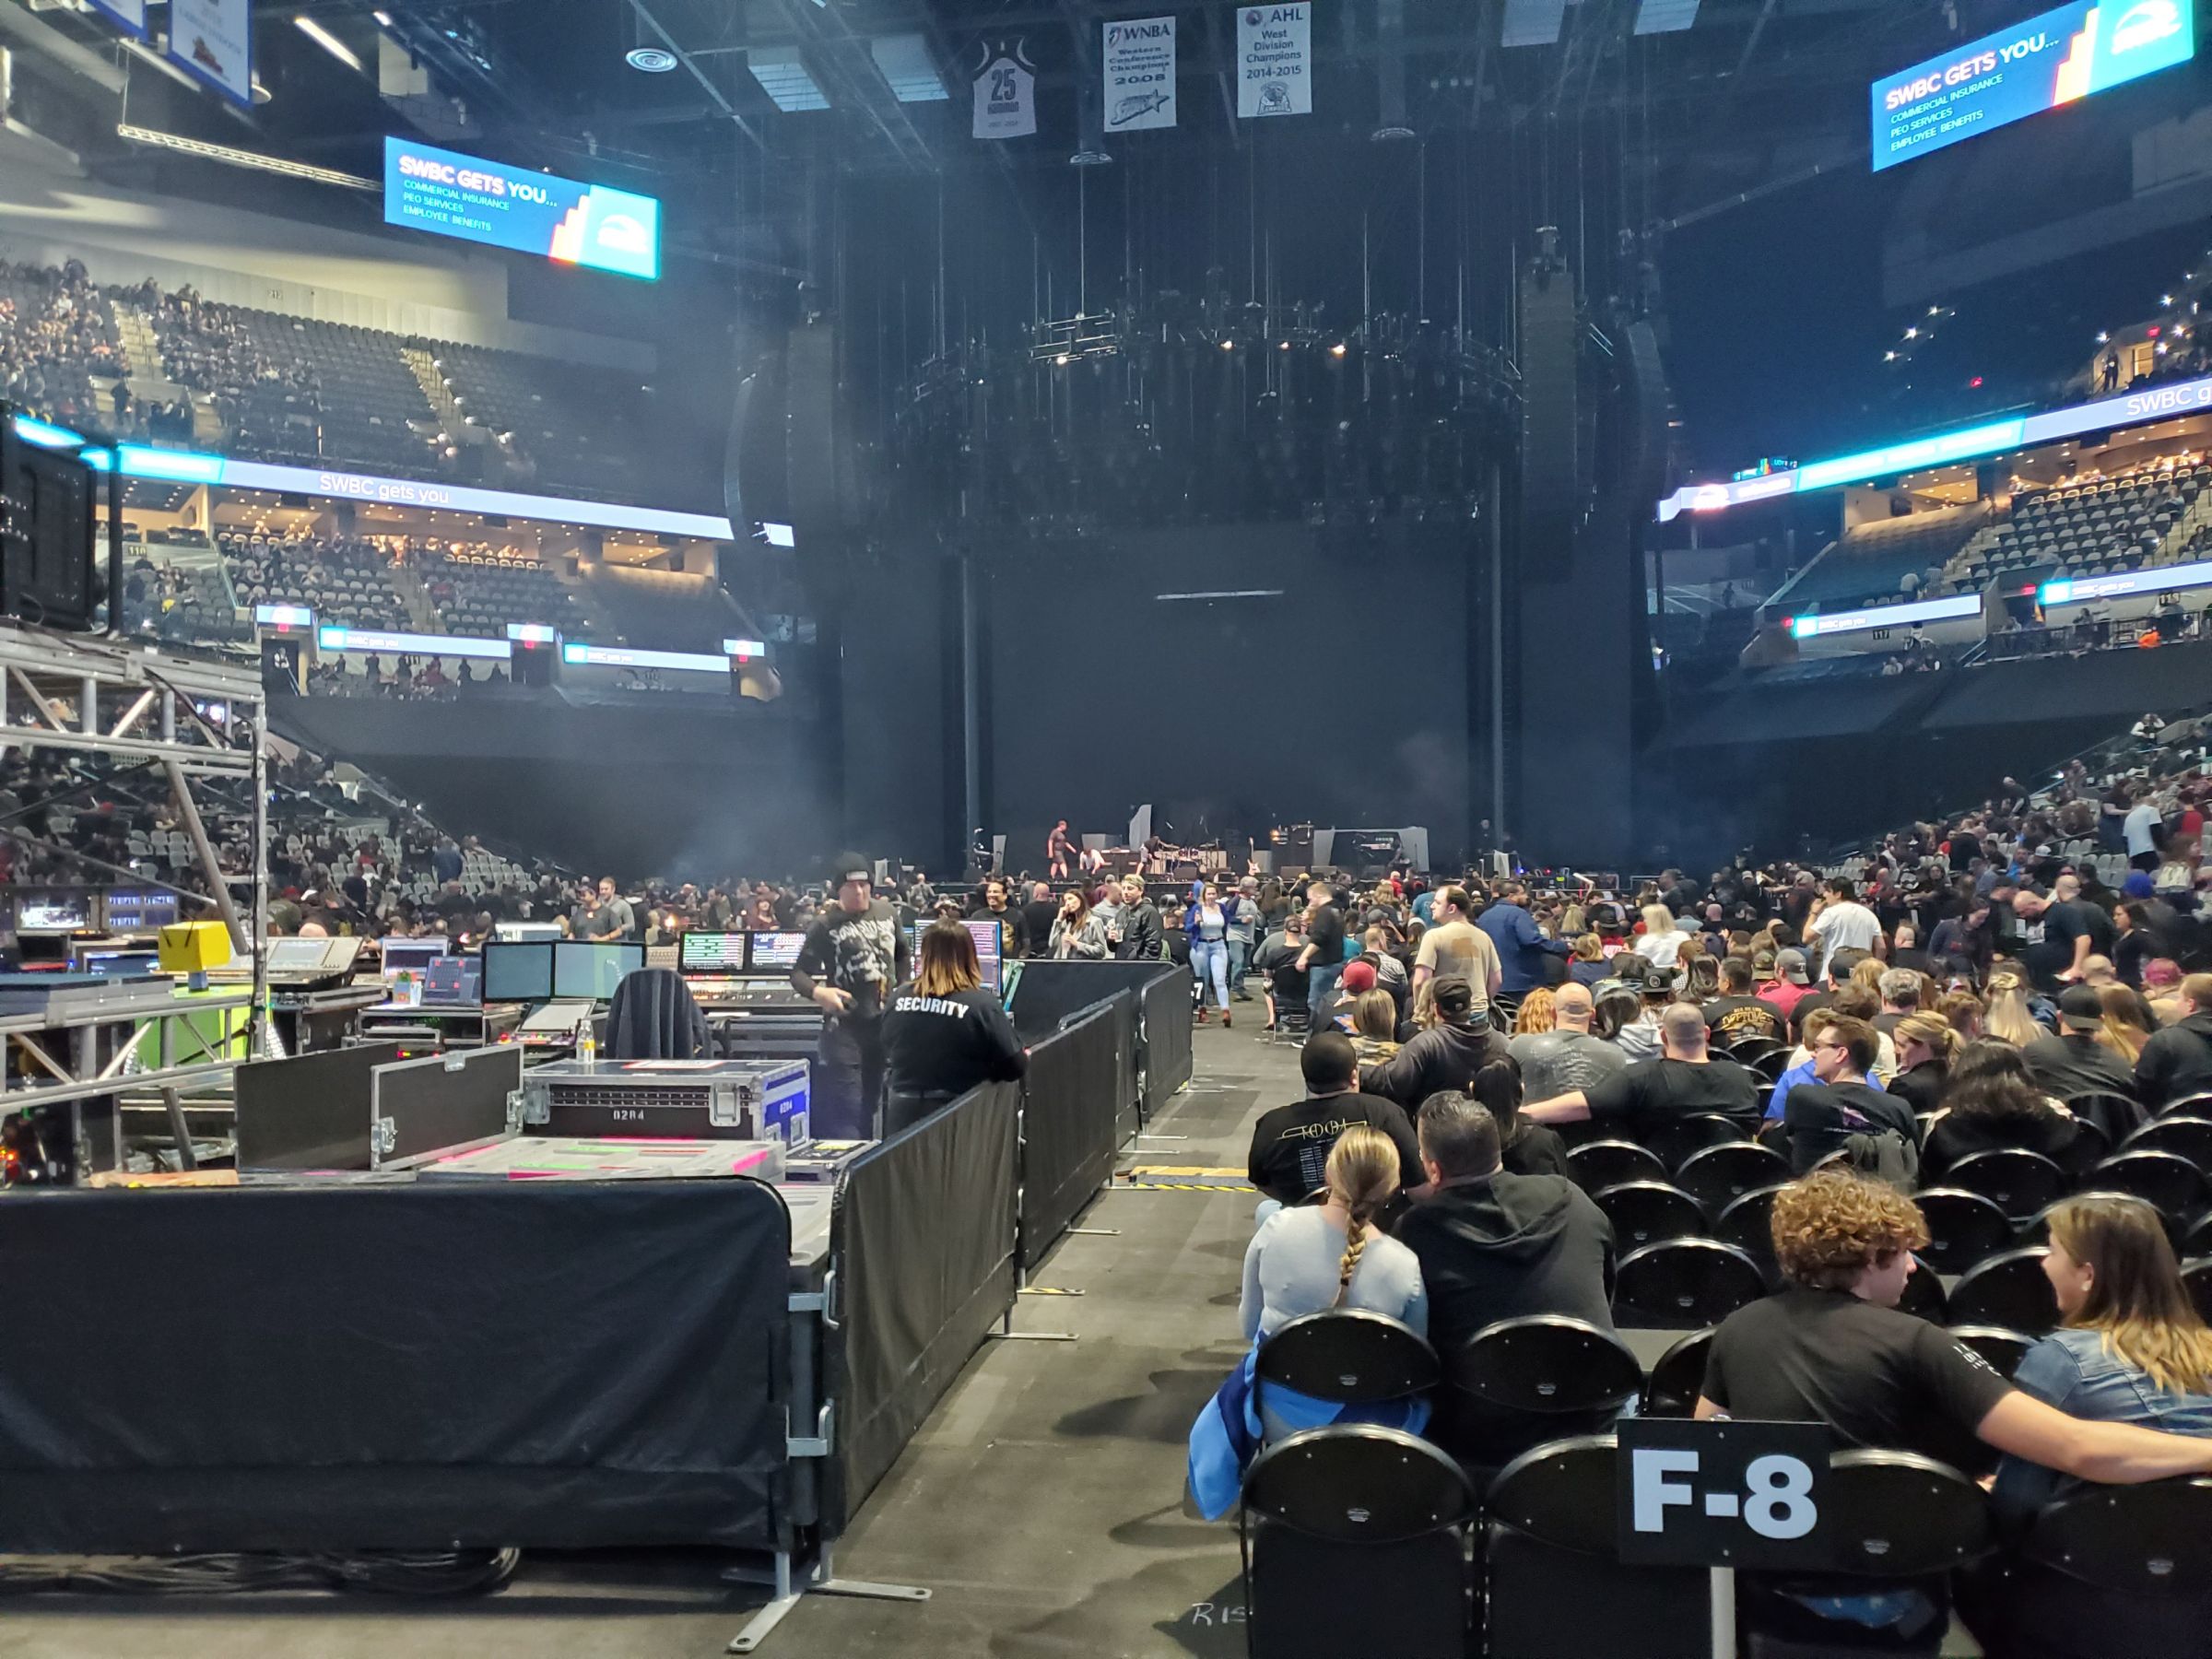 section 128, row 6 seat view  for concert - at&t center